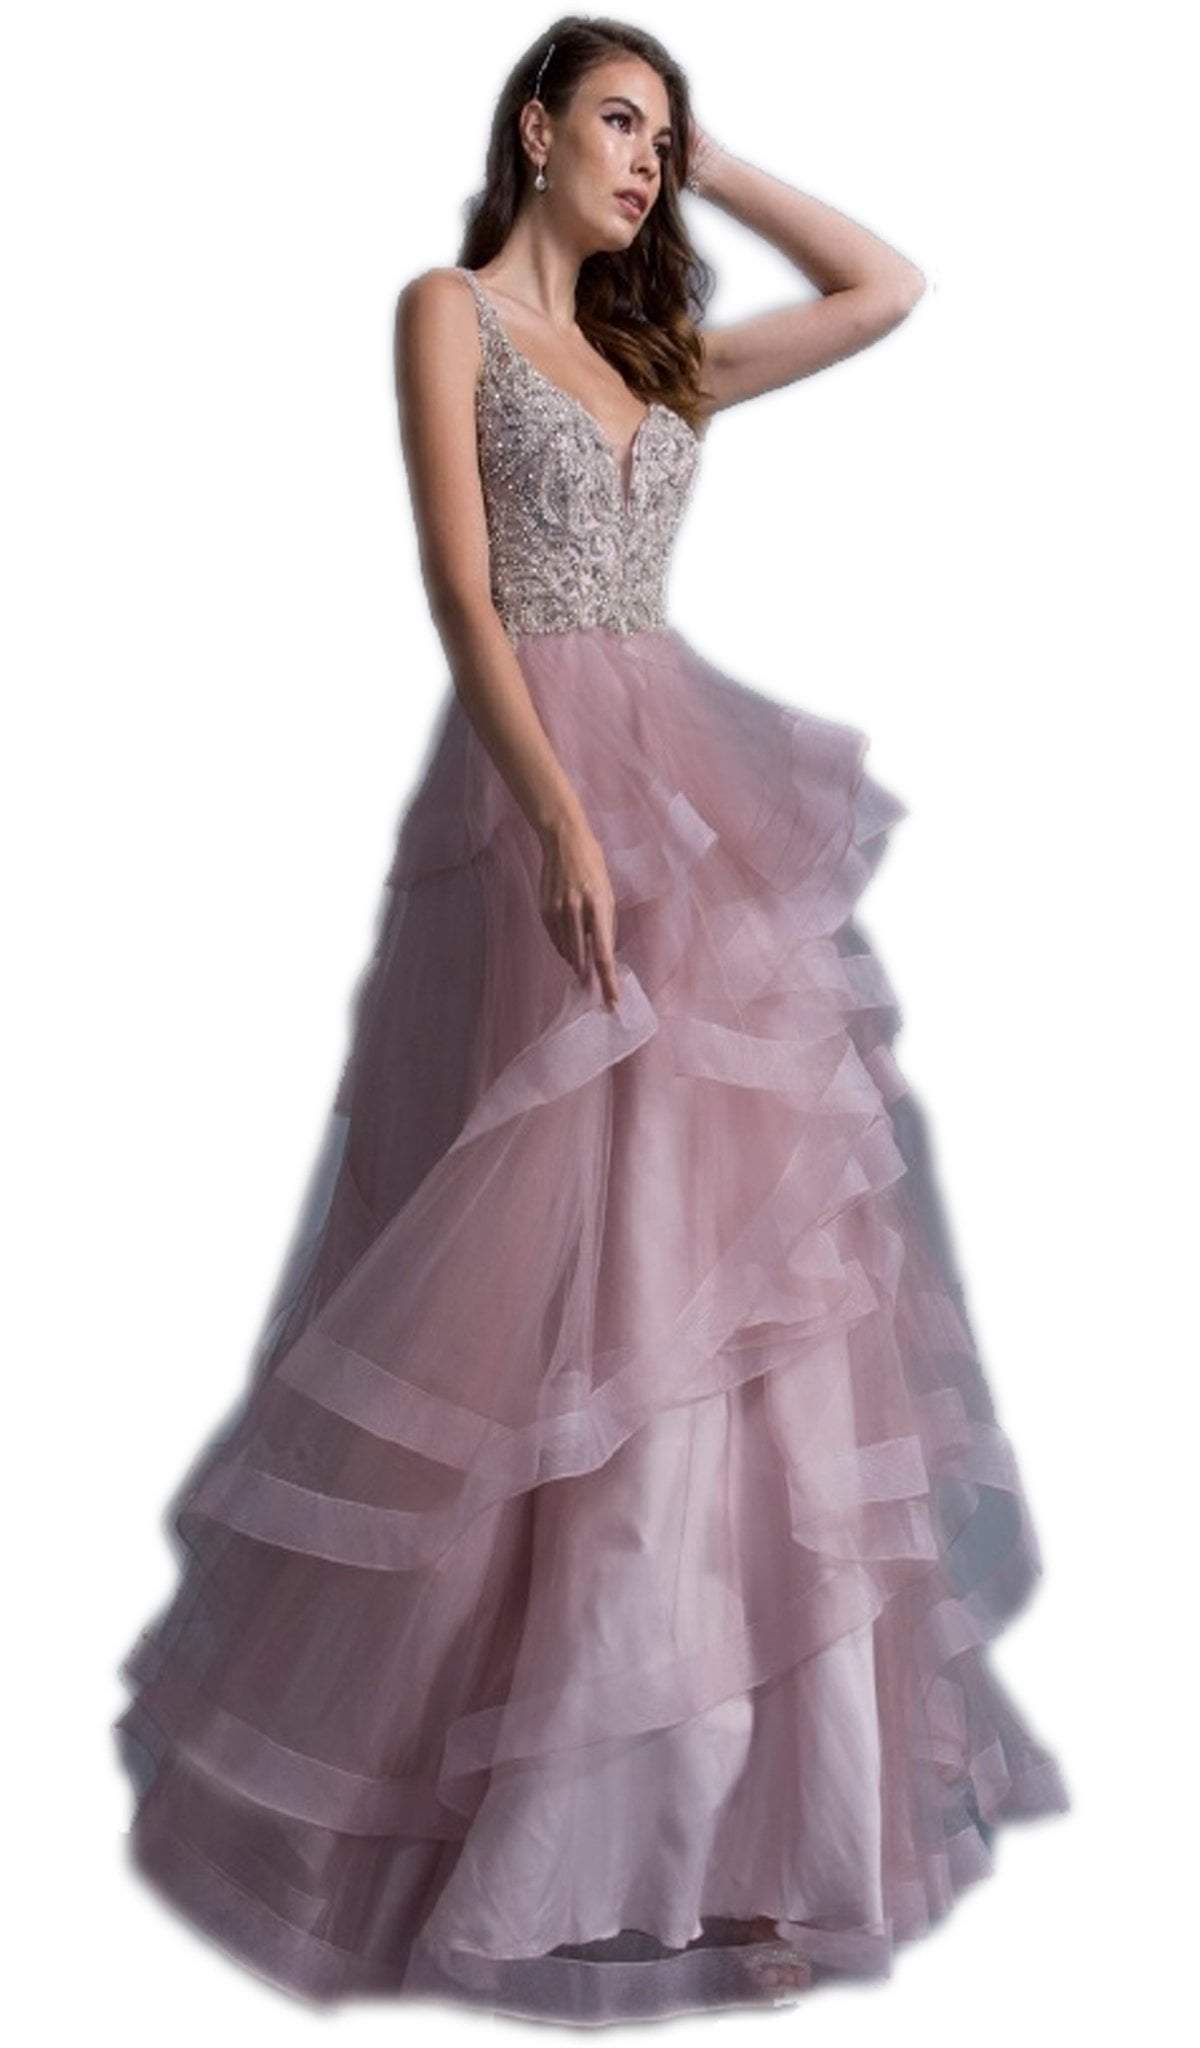 Image of Aspeed Design - Bedazzled V-neck Ruffled A-line Simple Prom Dress